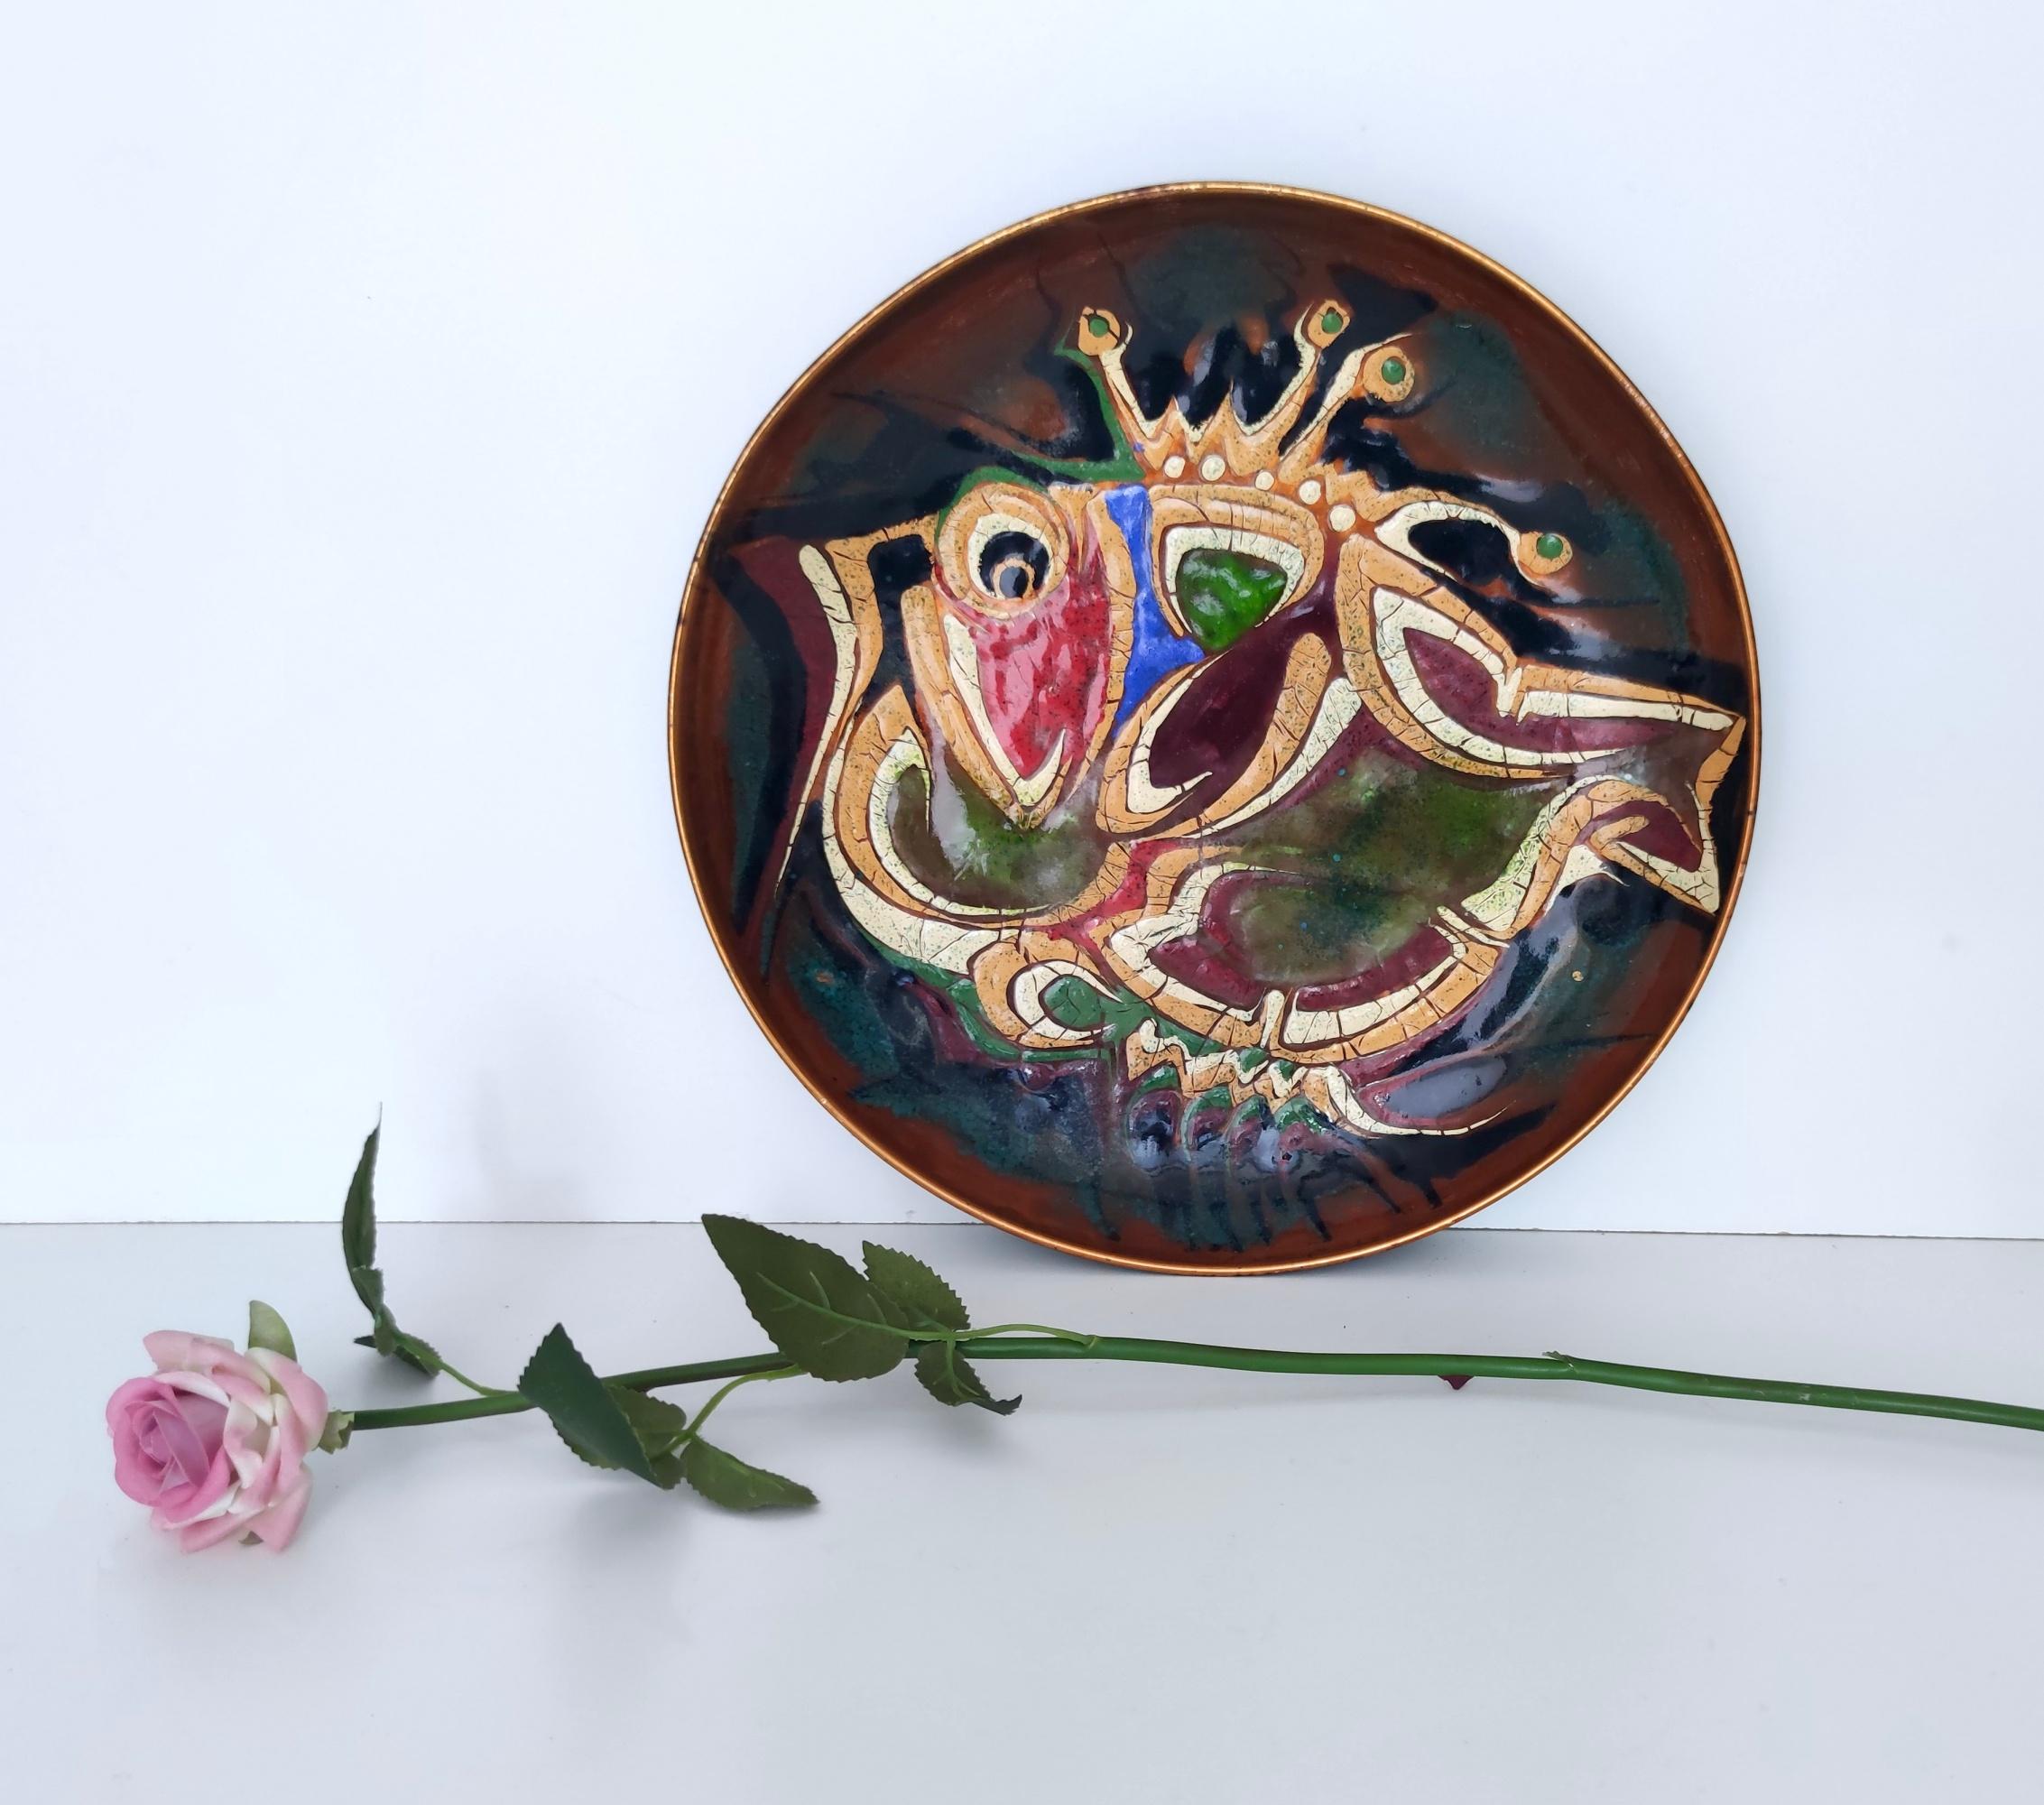 Made in Italy, 1950s. 
This catchall / vide-poche / decorative plate is made in hand-enameled copper and features splendid colors
It is a vintage piece, therefore it might show slight traces of use, but it can be considered as in very good original